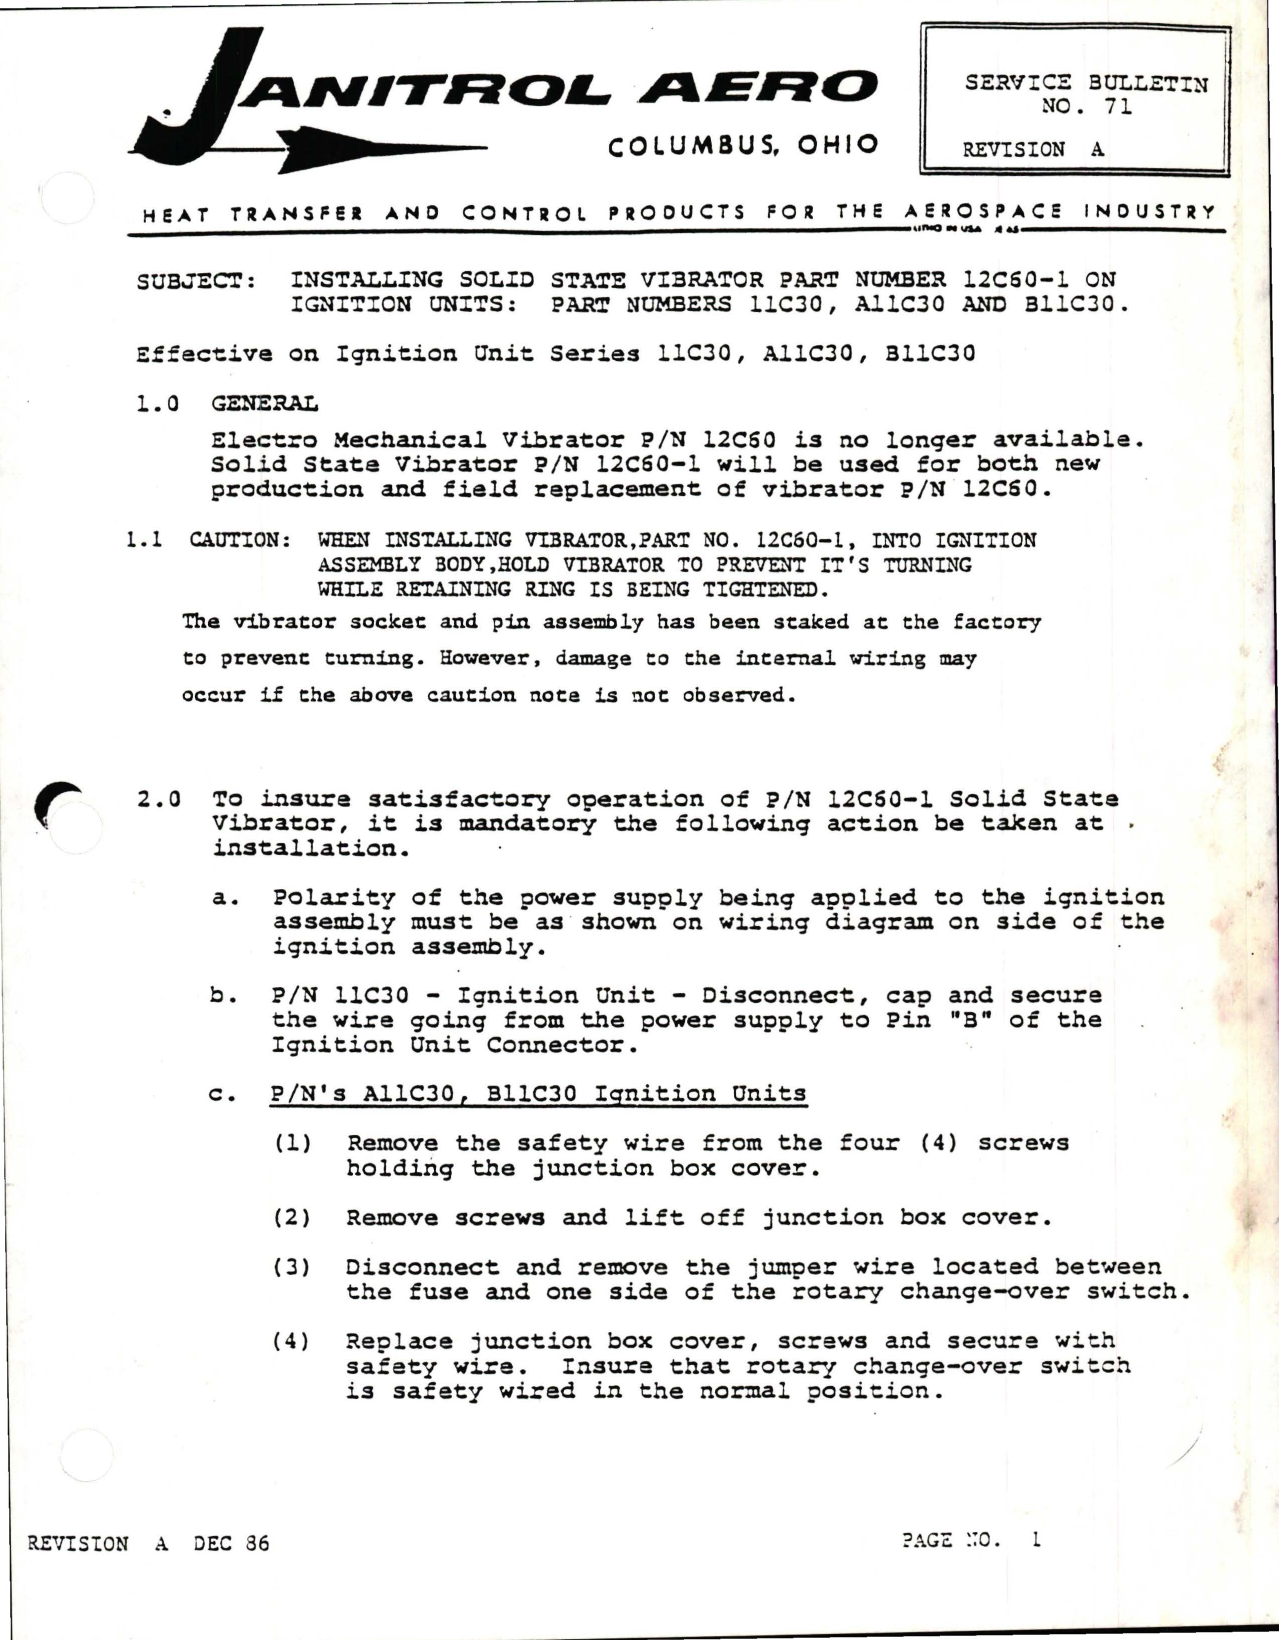 Sample page 1 from AirCorps Library document: Installing Solid State Vibrator - Part 12C60-1 on Ignition Units